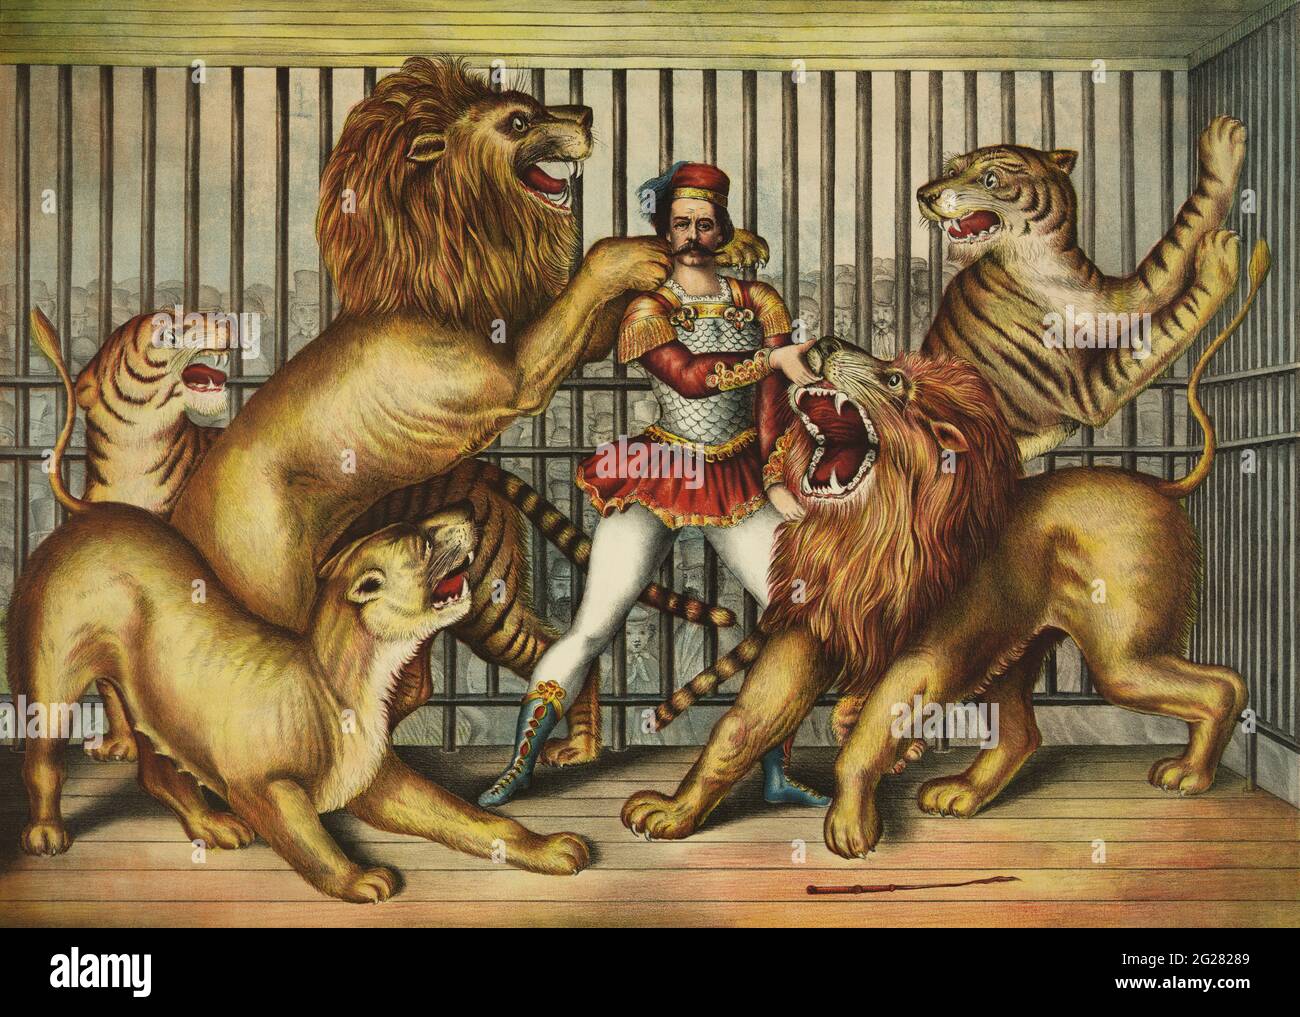 Lion tamer in cage with two lions, a lioness, and two tigers. Stock Photo